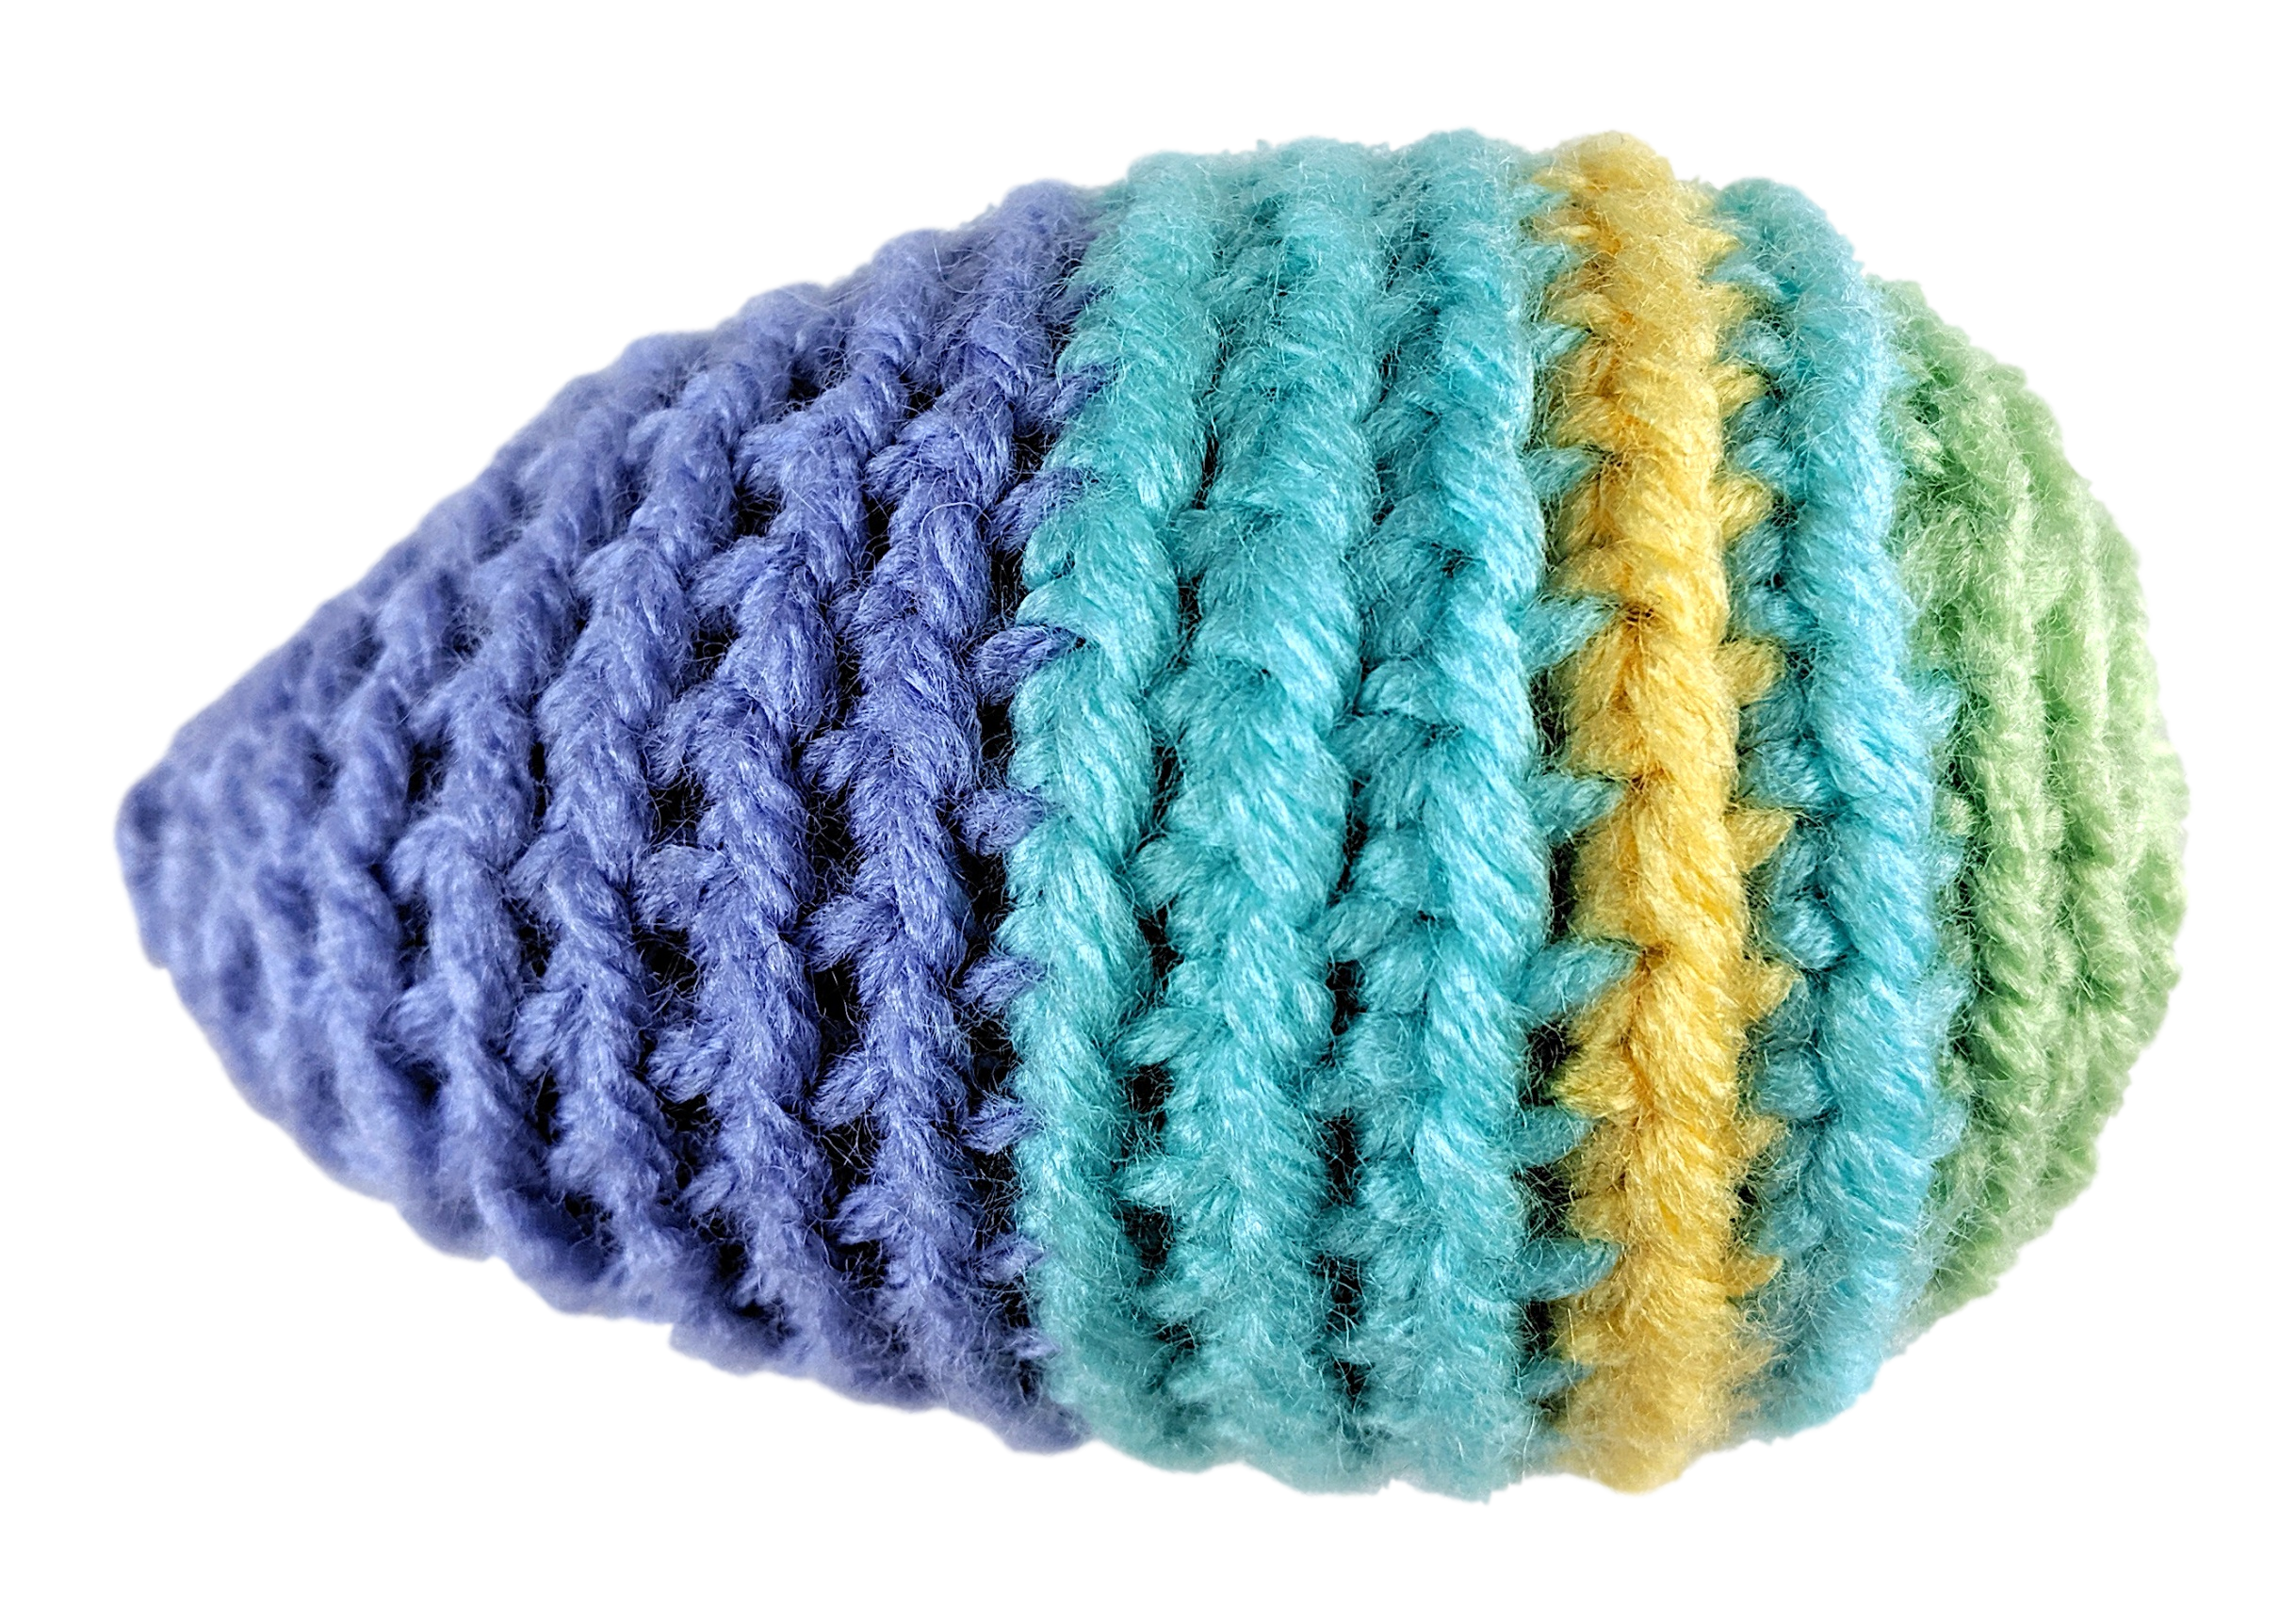 How to Count the Number of Stitches in a Round (crochet) - Shiny Happy World